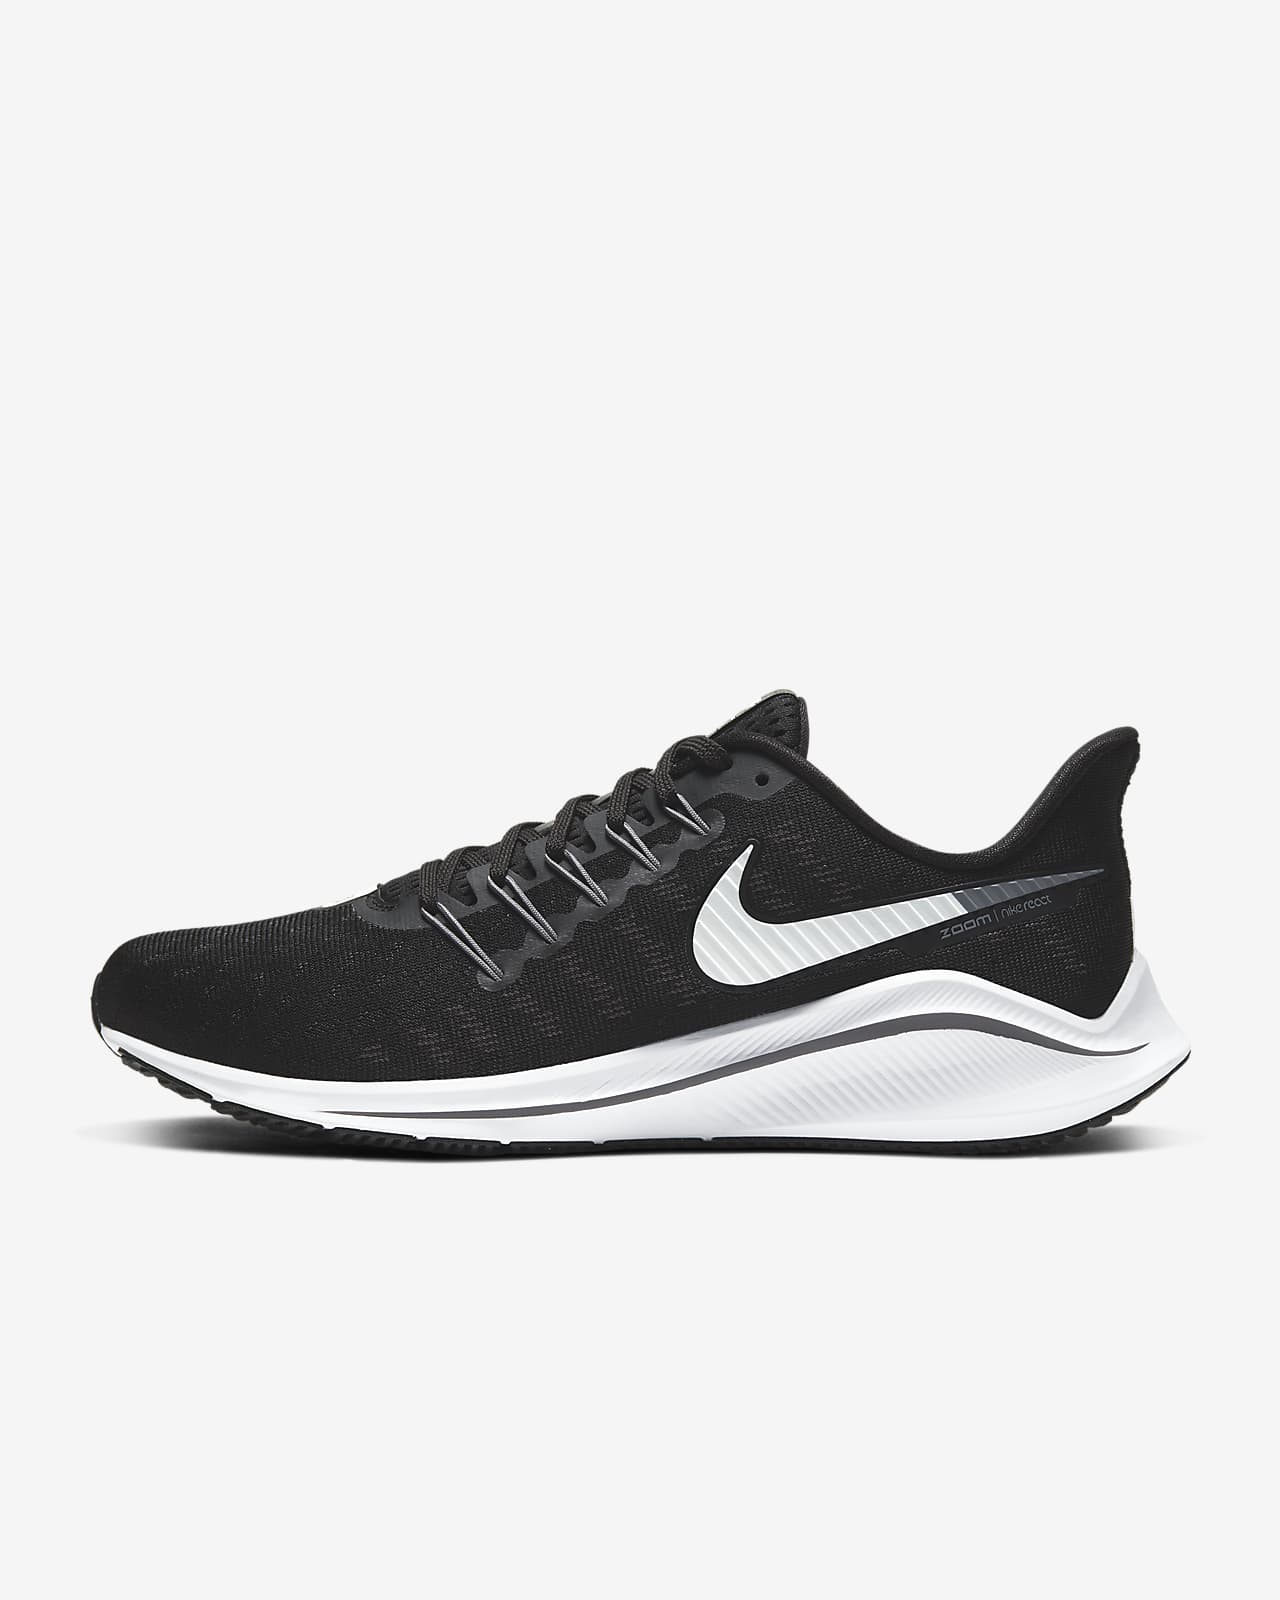 nike air zoom vomero 14 running shoes mens